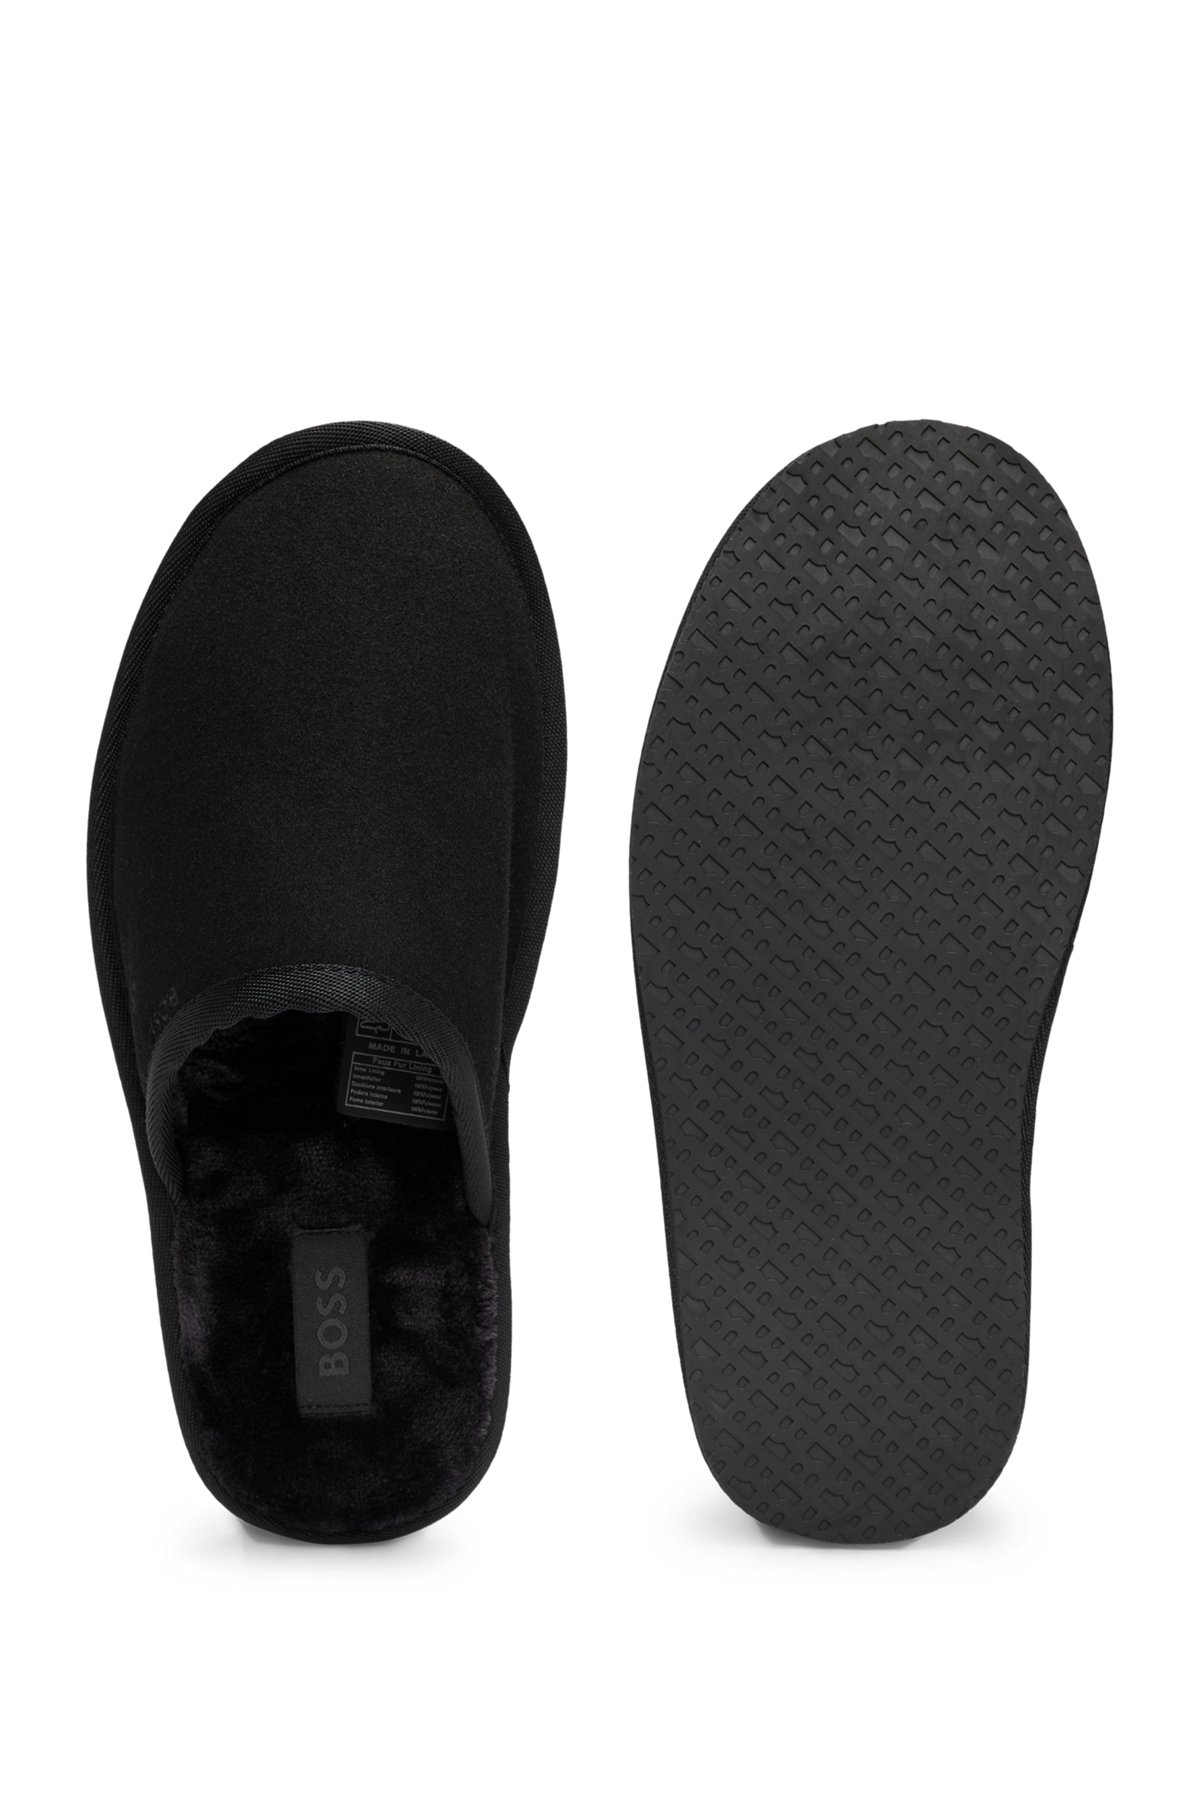 Faux-suede slippers with rubber sole, Black